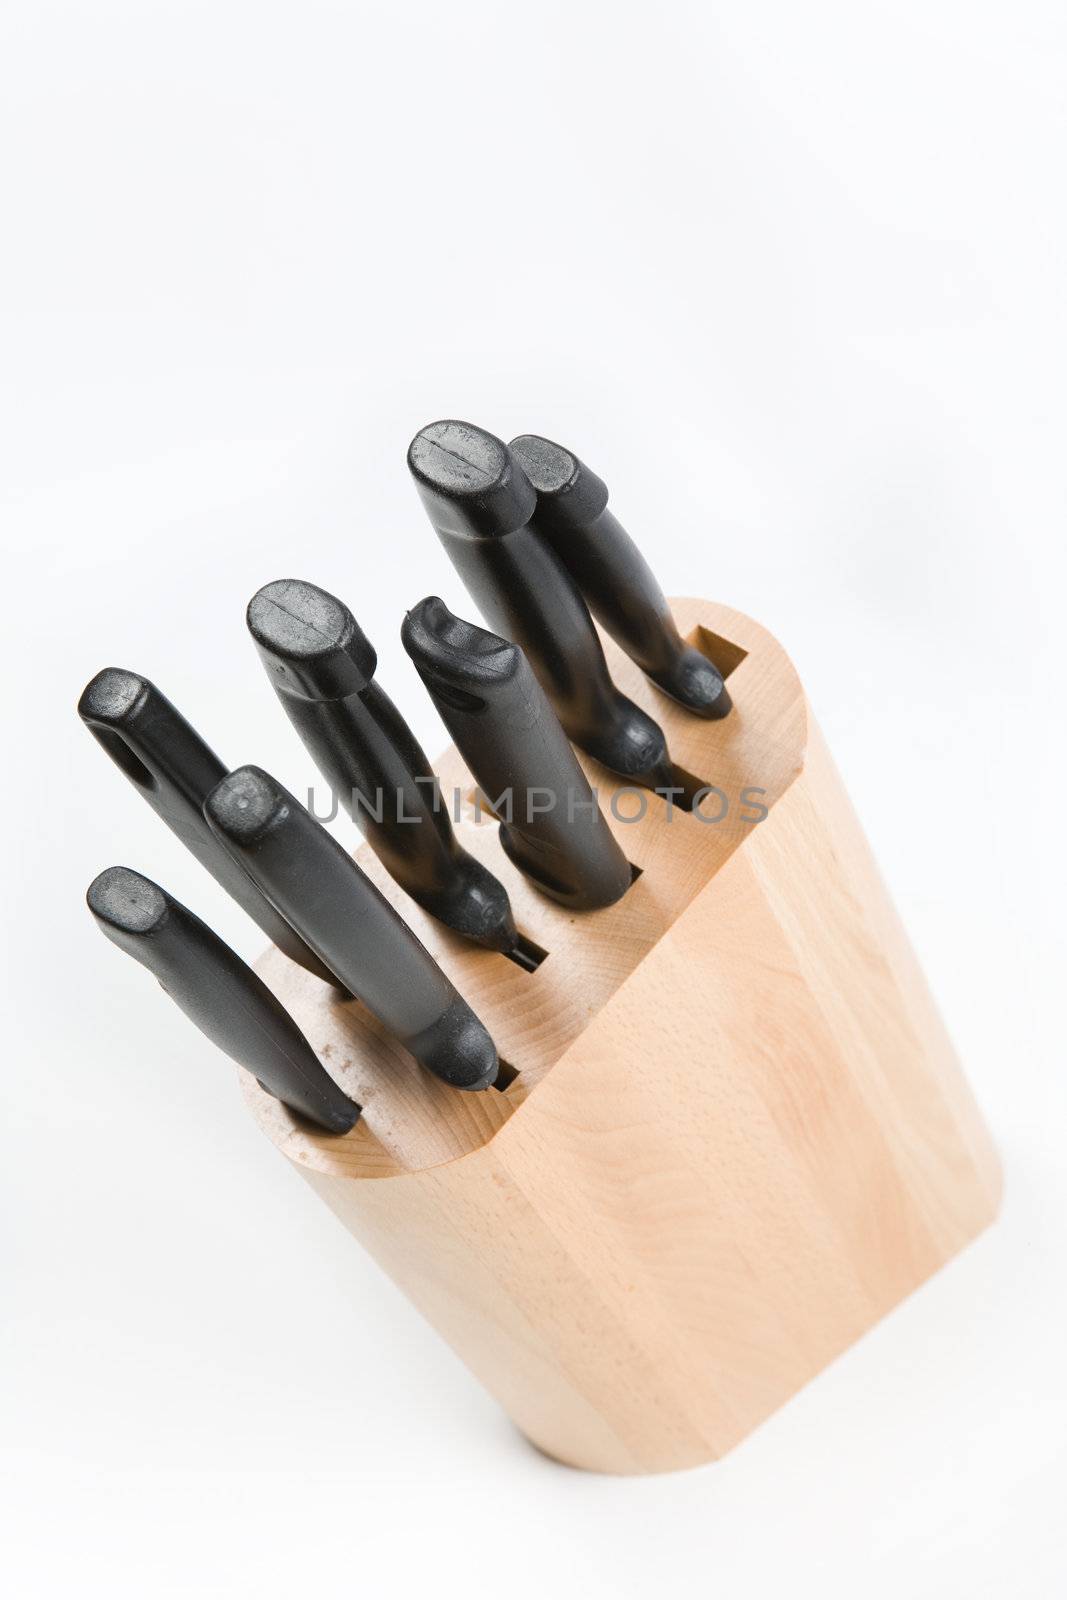 Kitchen knives in a wooden block on a white background